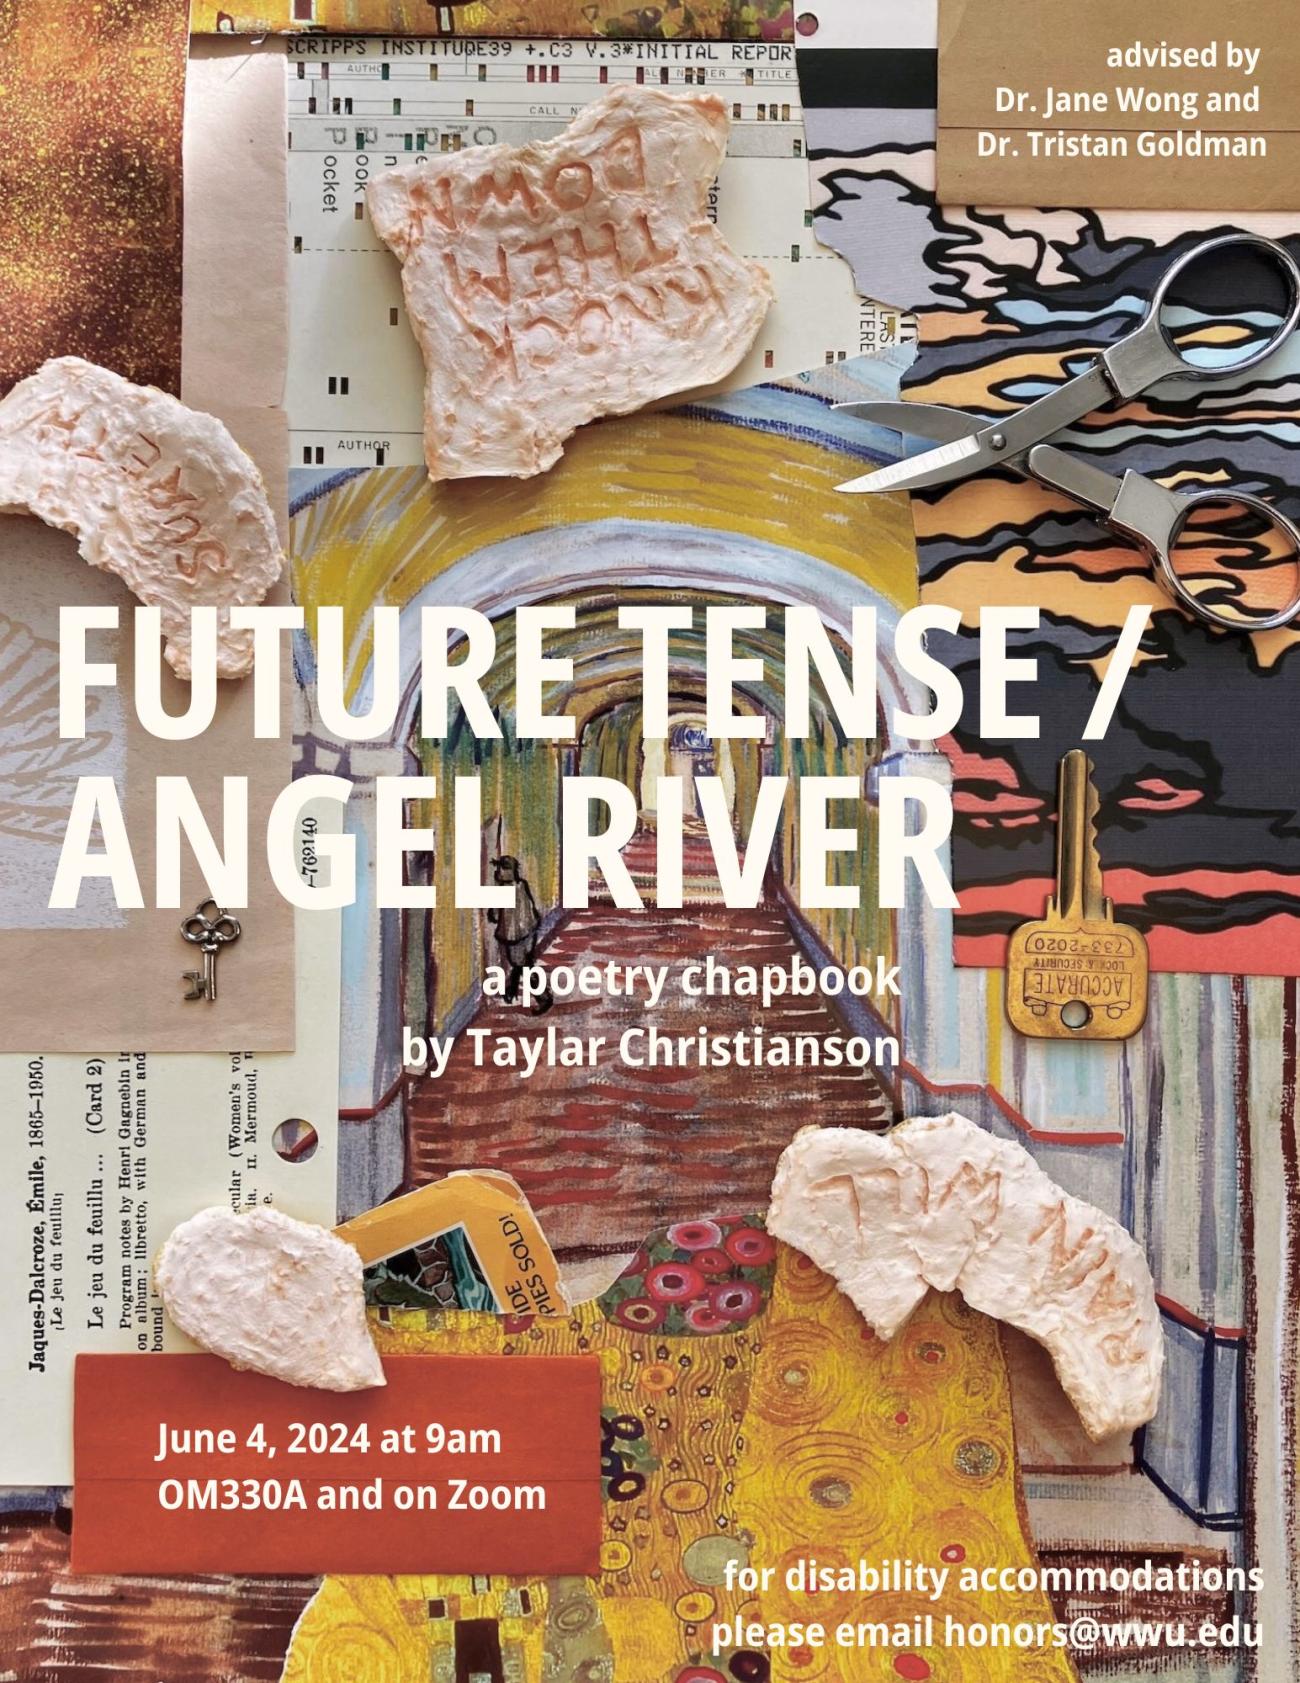 A warm-toned, layered collage background, including yellow, orange, brown, and cream decorative paper, a pair of scissors, keys, and pale pieces of citrus peel with upside-down letters marked into them. Text reads "FUTURE TENSE / ANGEL RIVER, a poetry chapbook by Taylar Christianson. Advised by Dr. Jane Wong and Dr. Tristan Goldman. June 4, 2024 at 9am, OM330A and on Zoom. For disability accommodations, please email honors@wwu.edu."